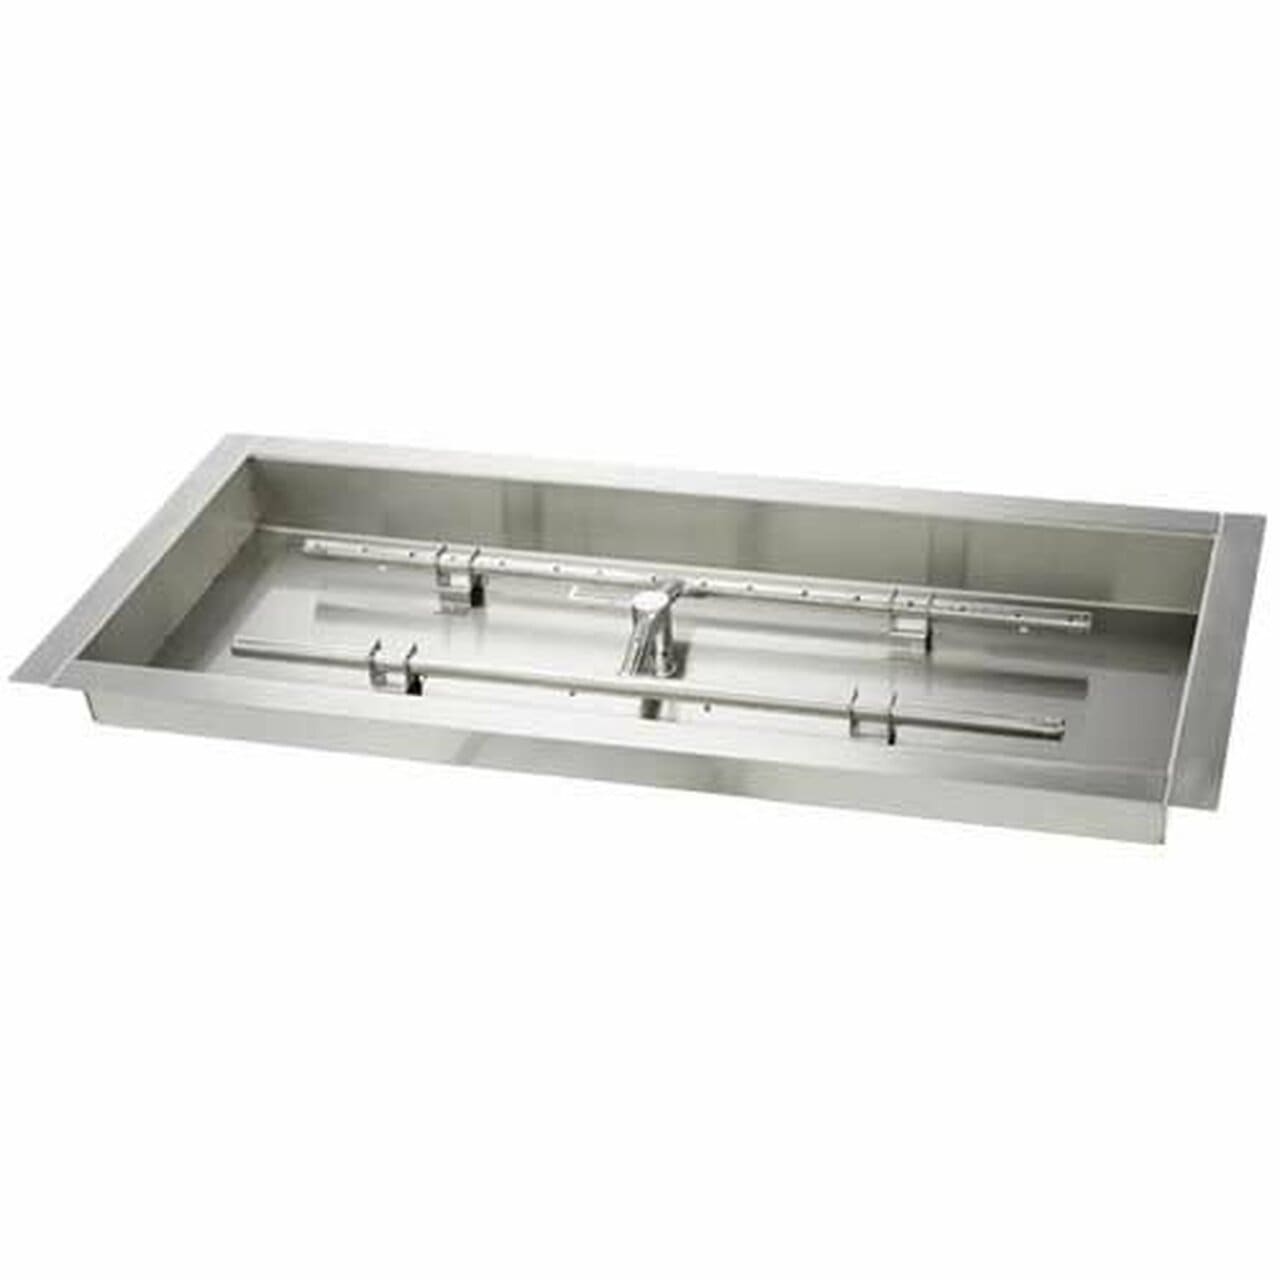 HPCFire 42 X 14" Pan with SST Torpedo H-Burner made from 304 Stainless Steel - LP TOR-42X14SS-H-LP